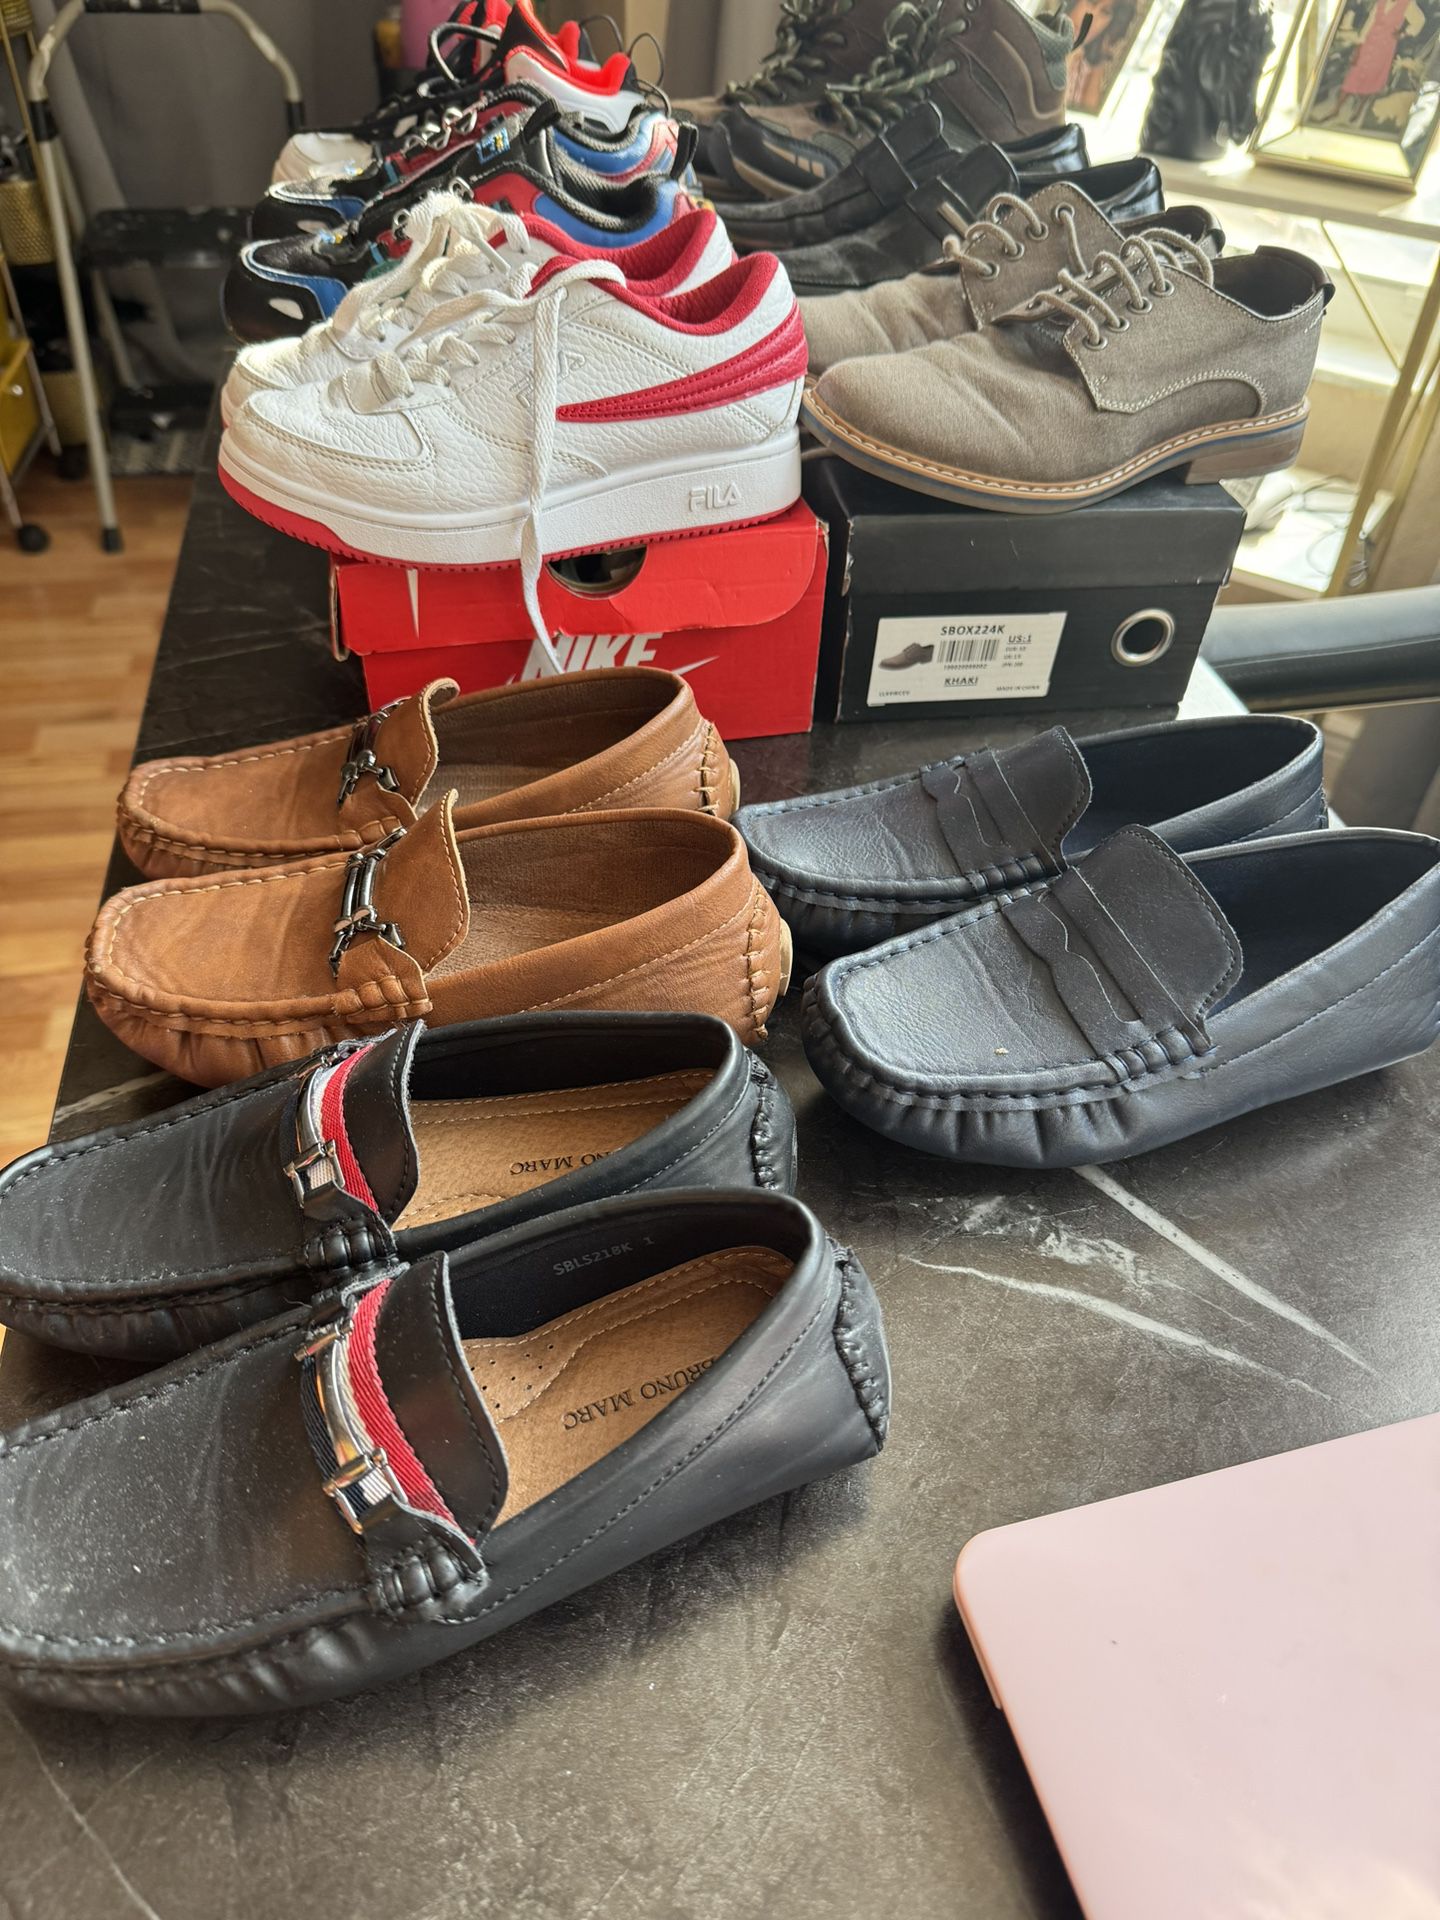 Boys Shoes For Sale